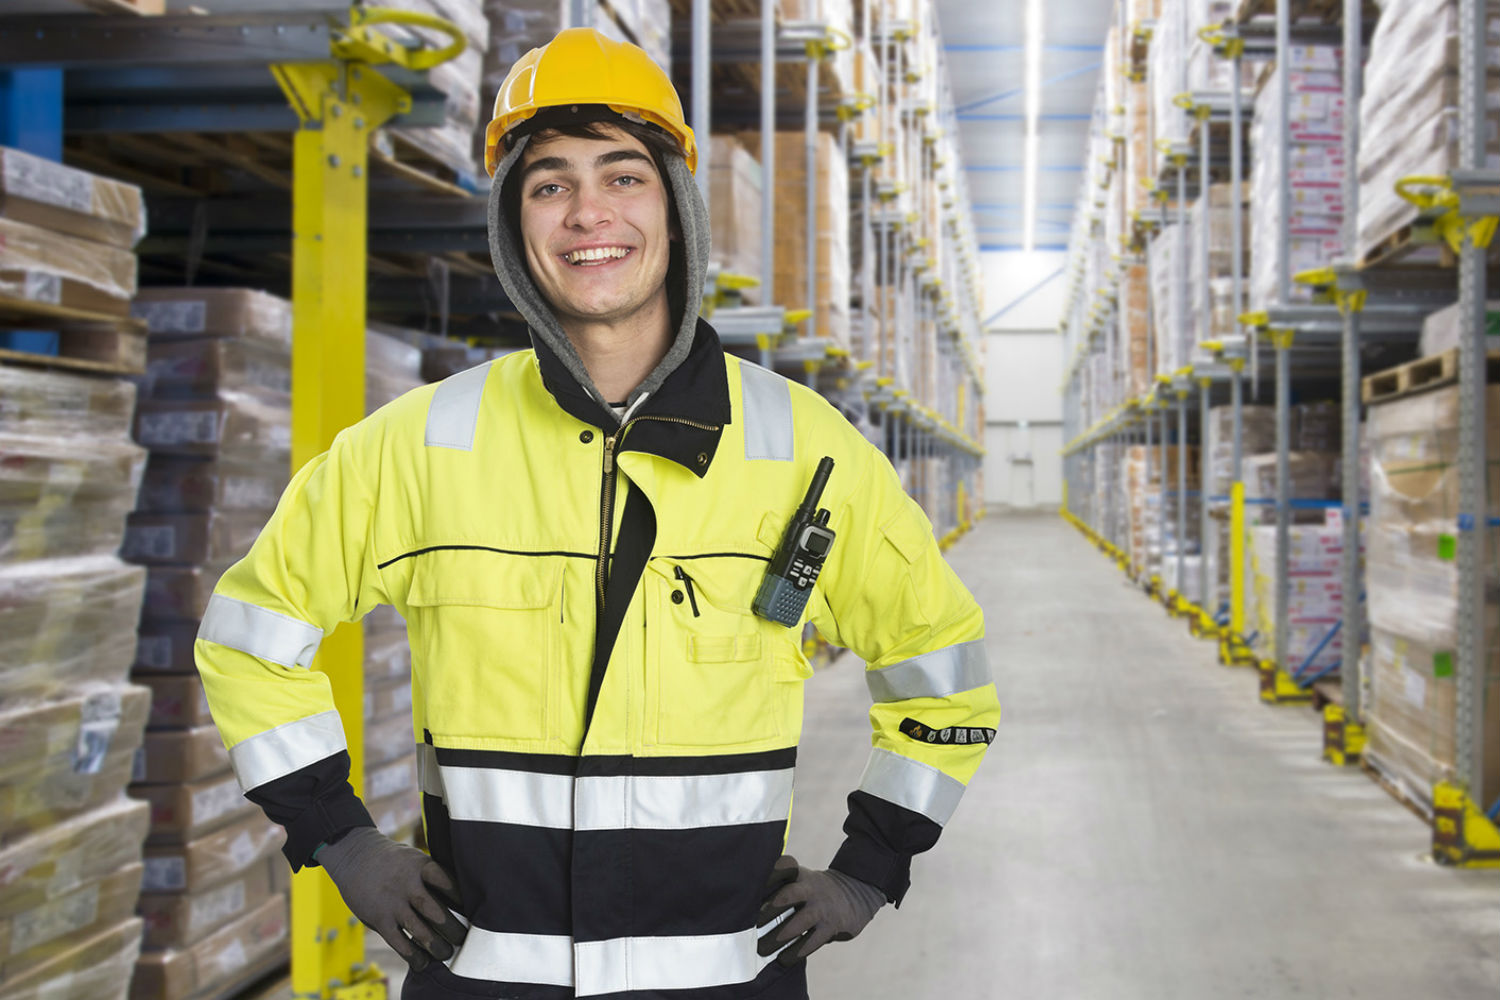 Euro Staff Solution Warehouse workers – United Kingdom (employment contracts)